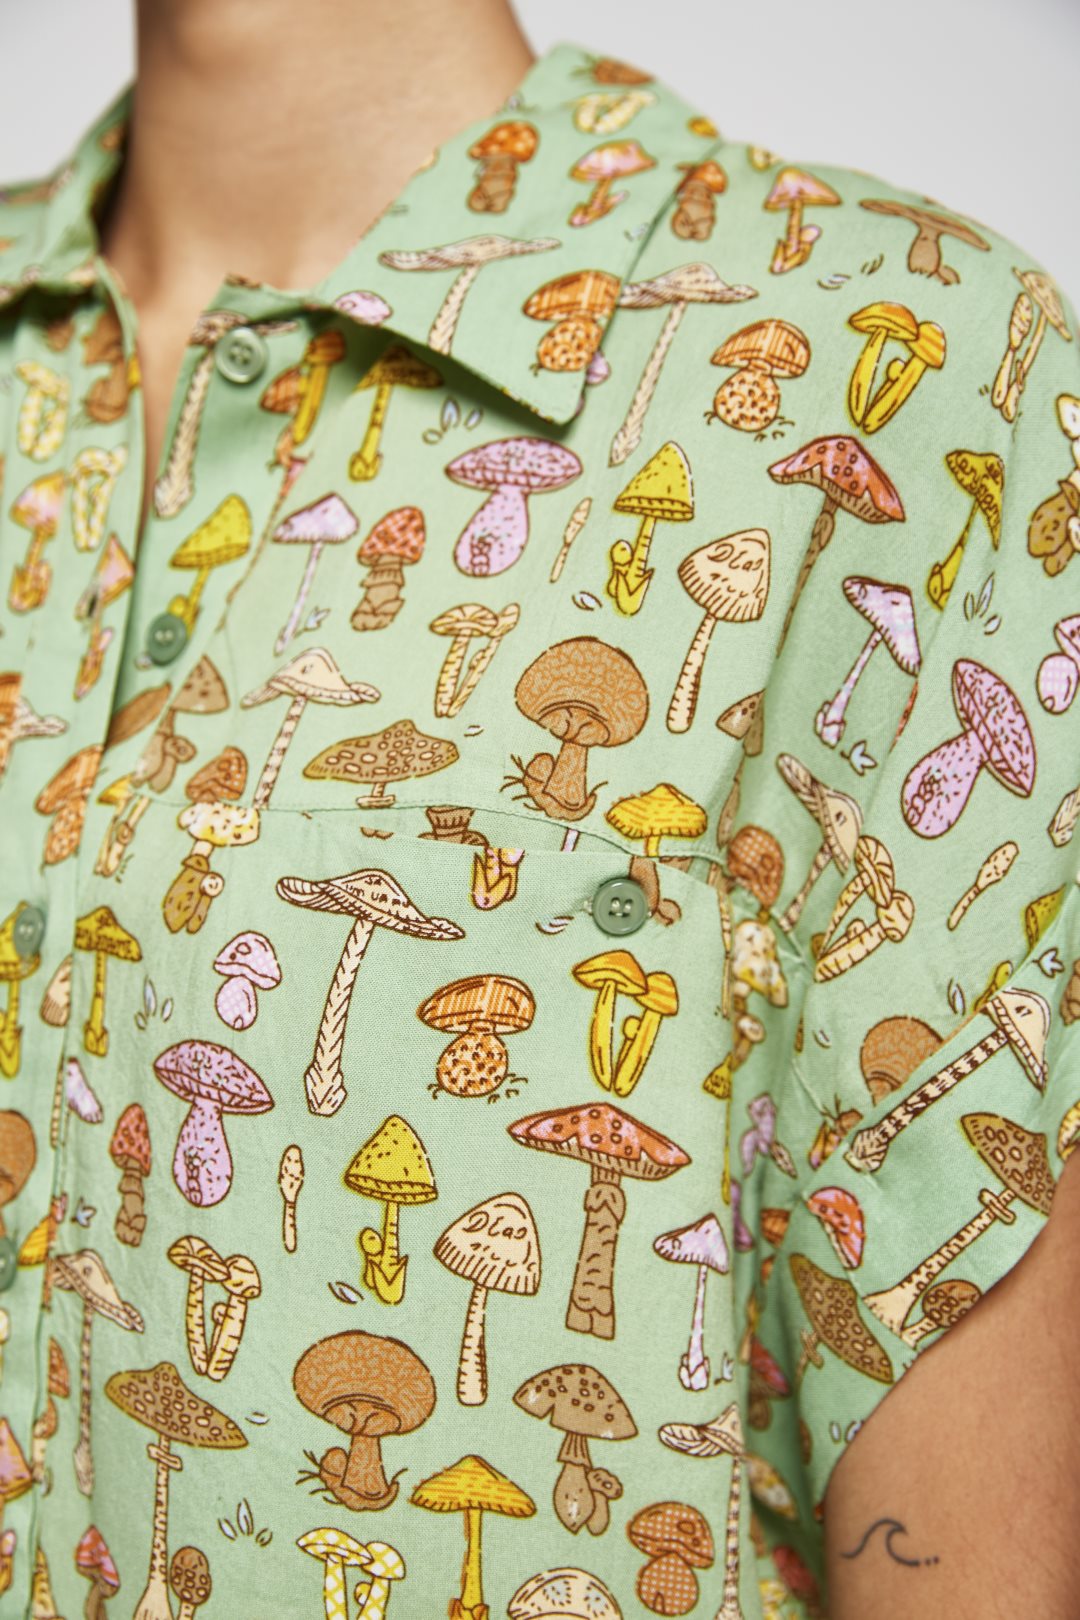 Printed shirt with pockets